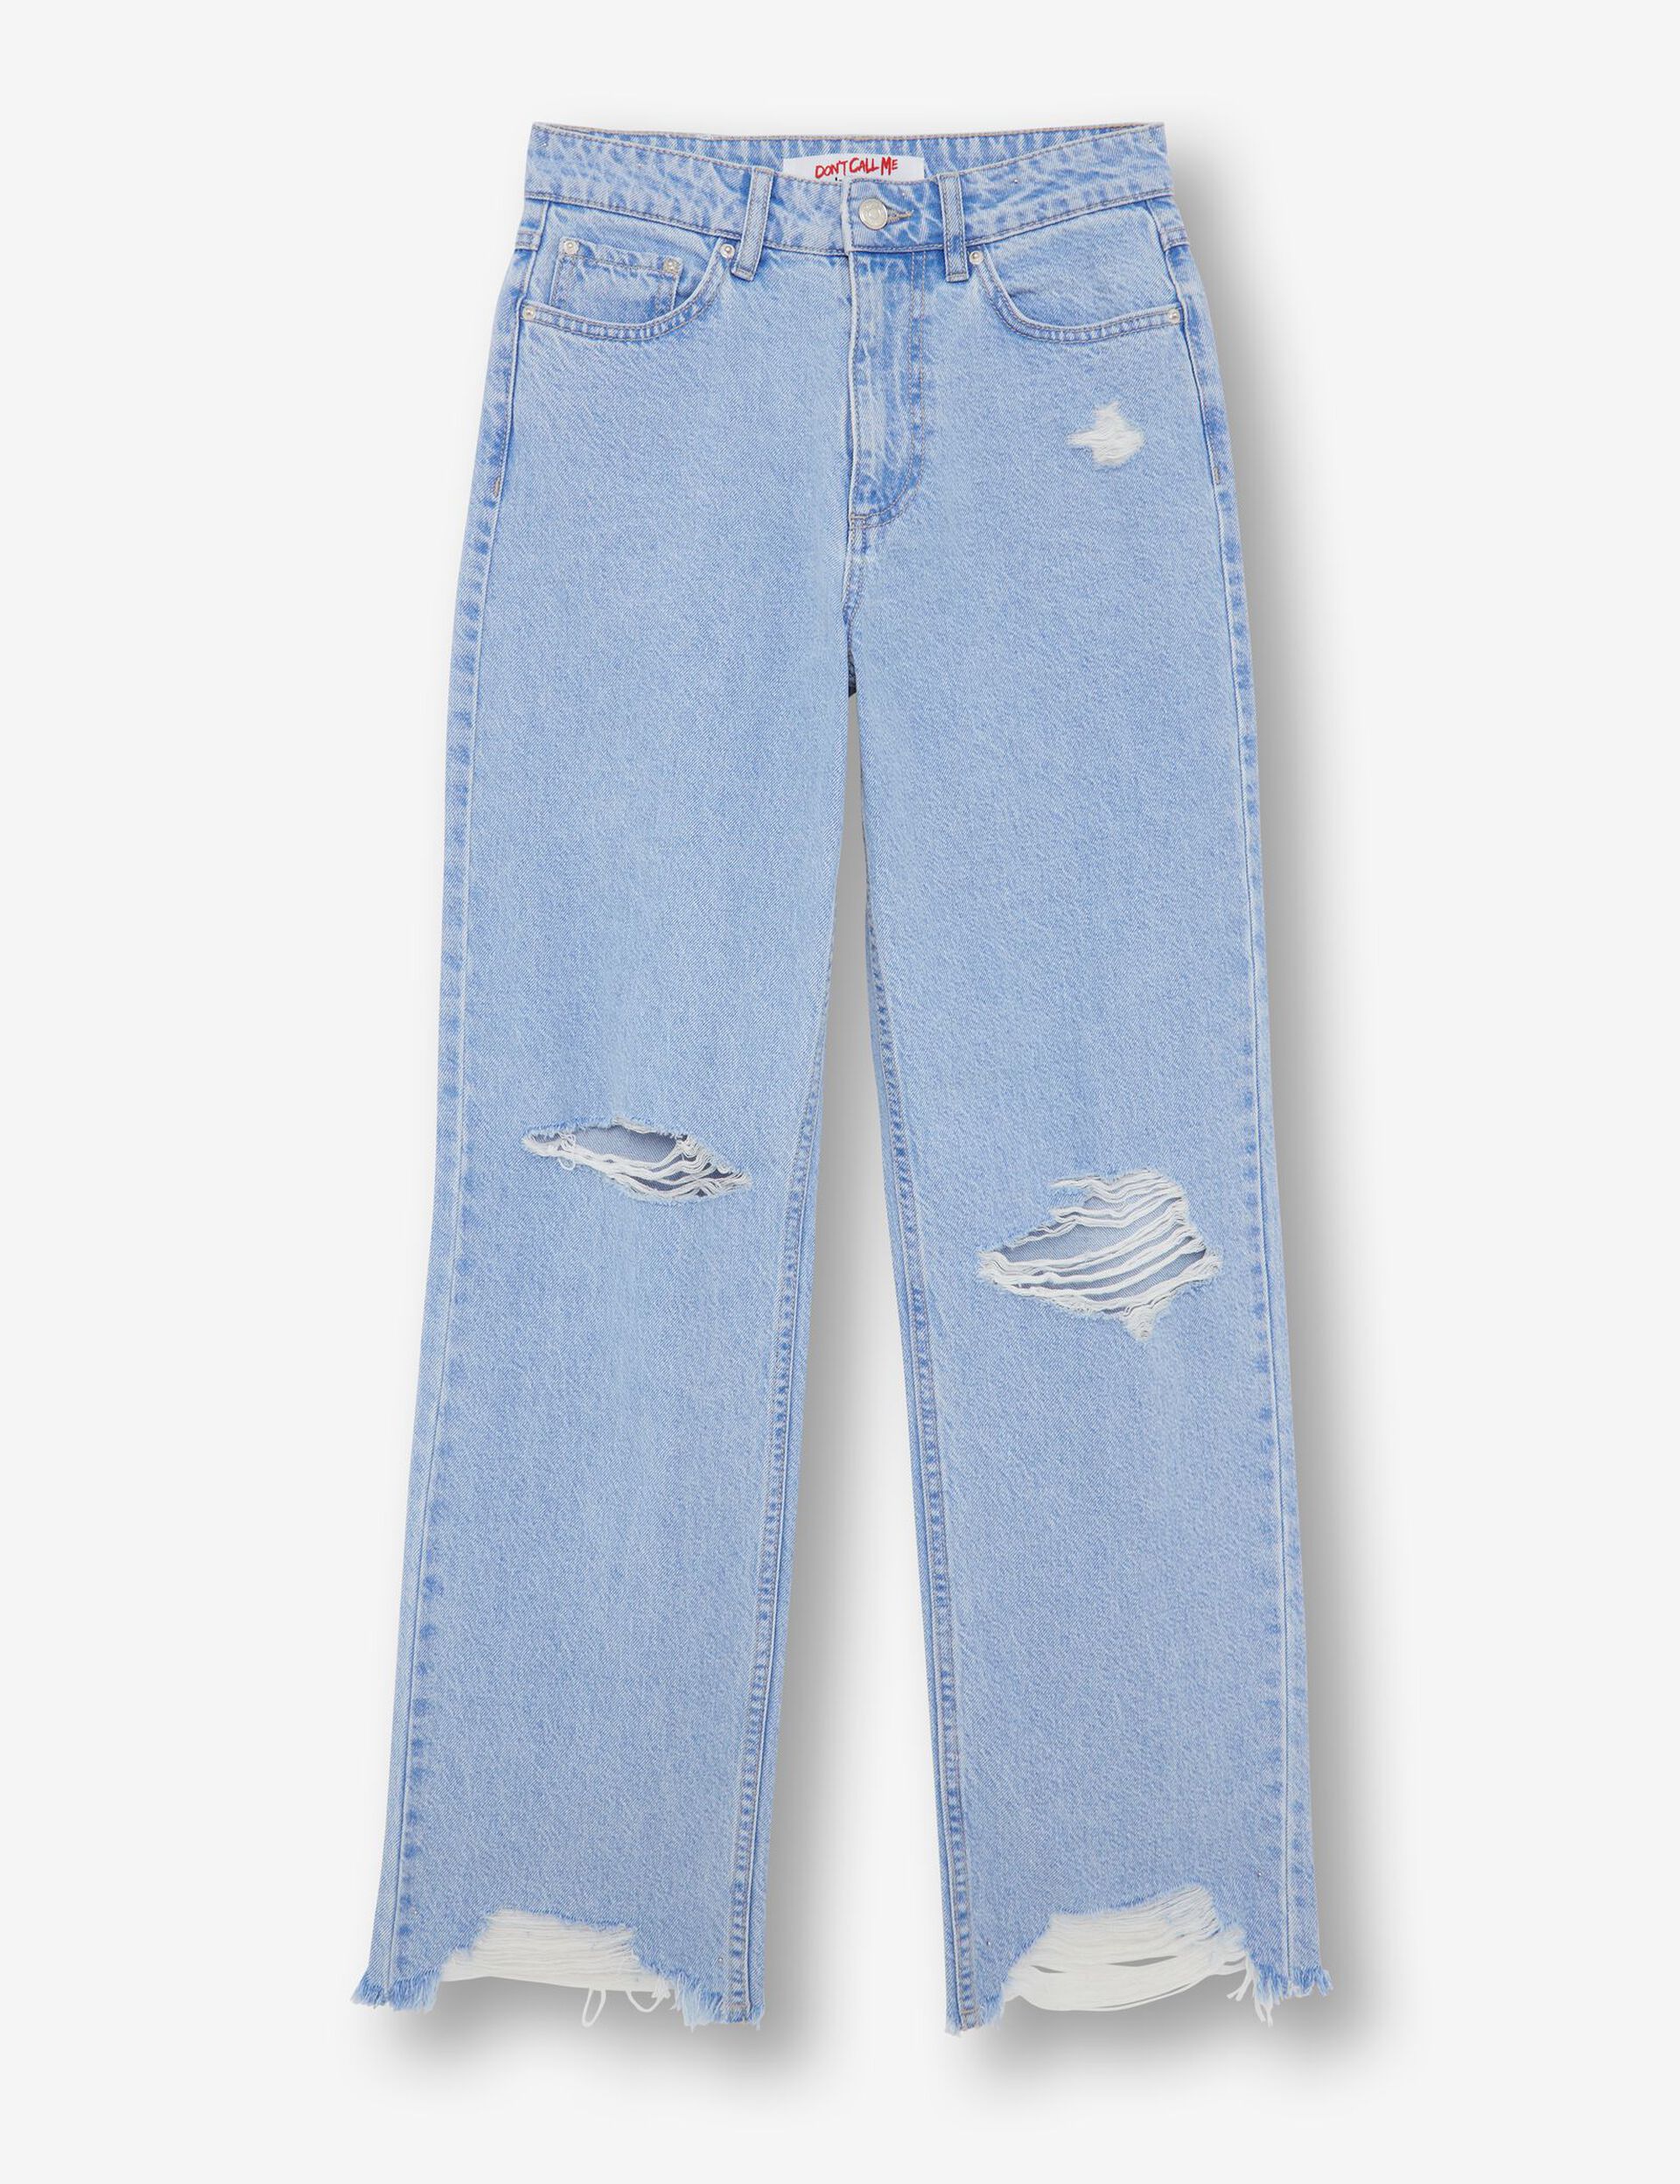 High-waisted distressed jeans